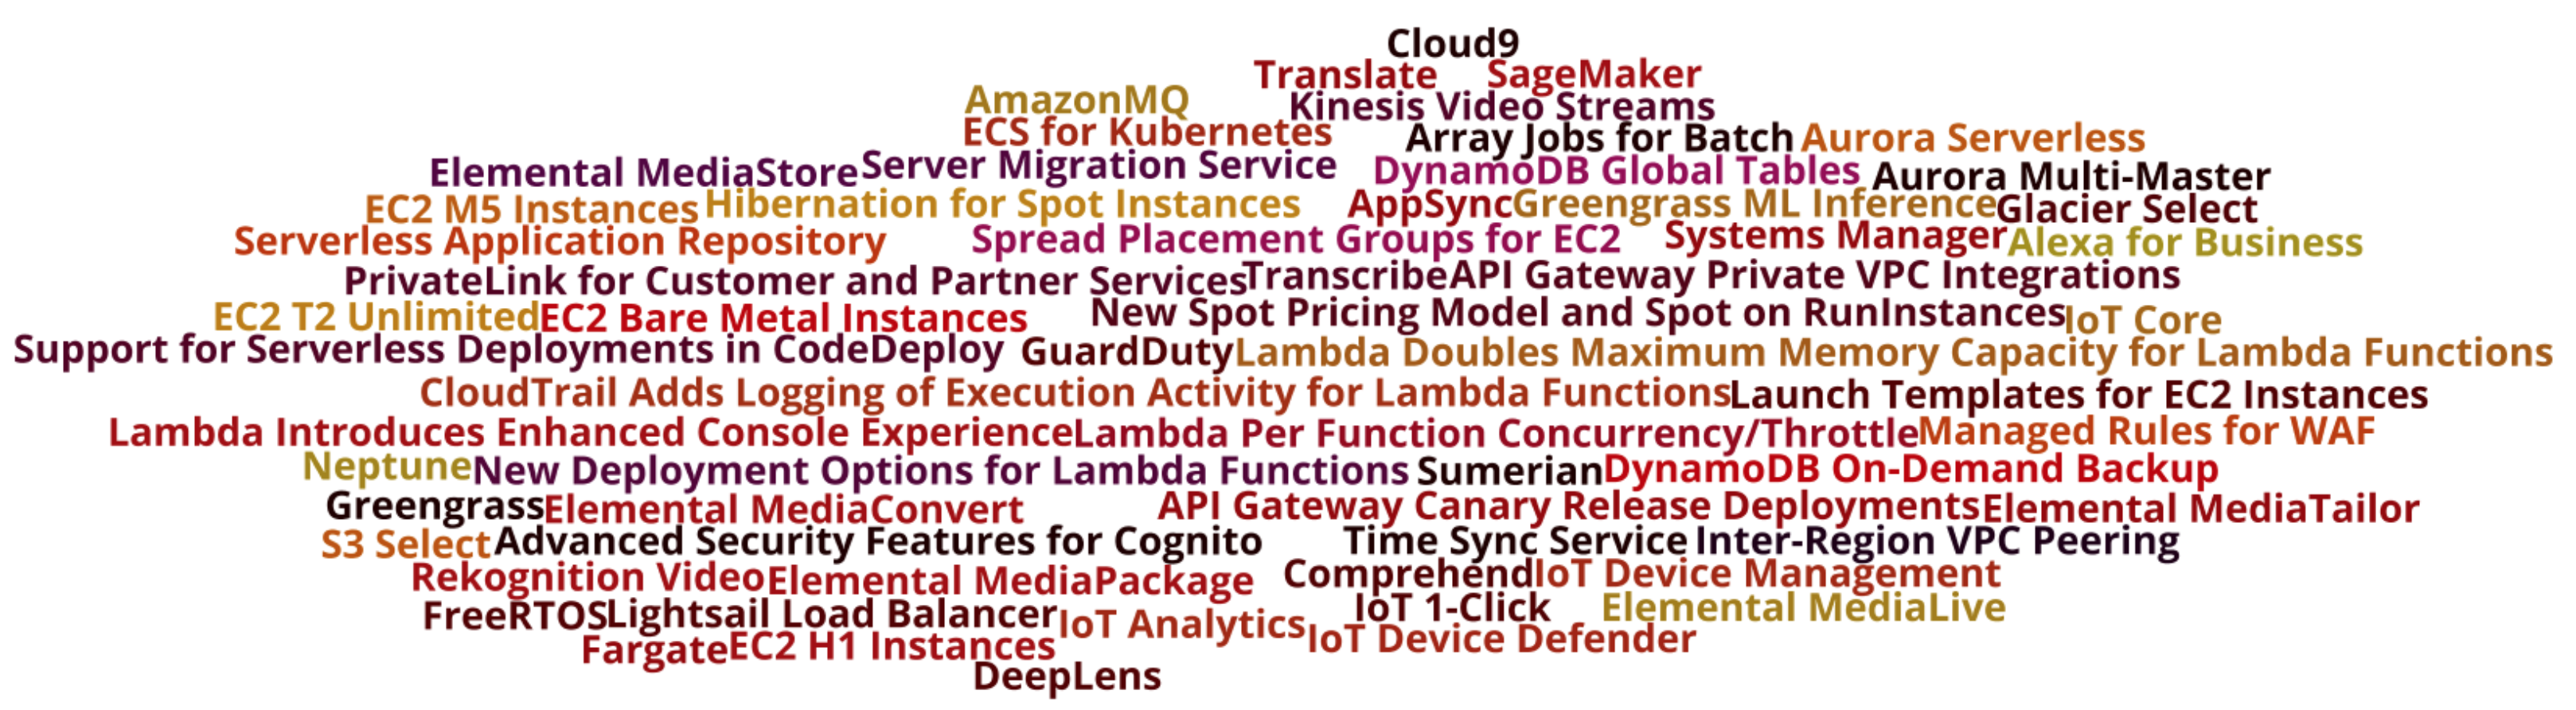 wordle word cloud of all 61 of the new or updated Amazon services from reInvent